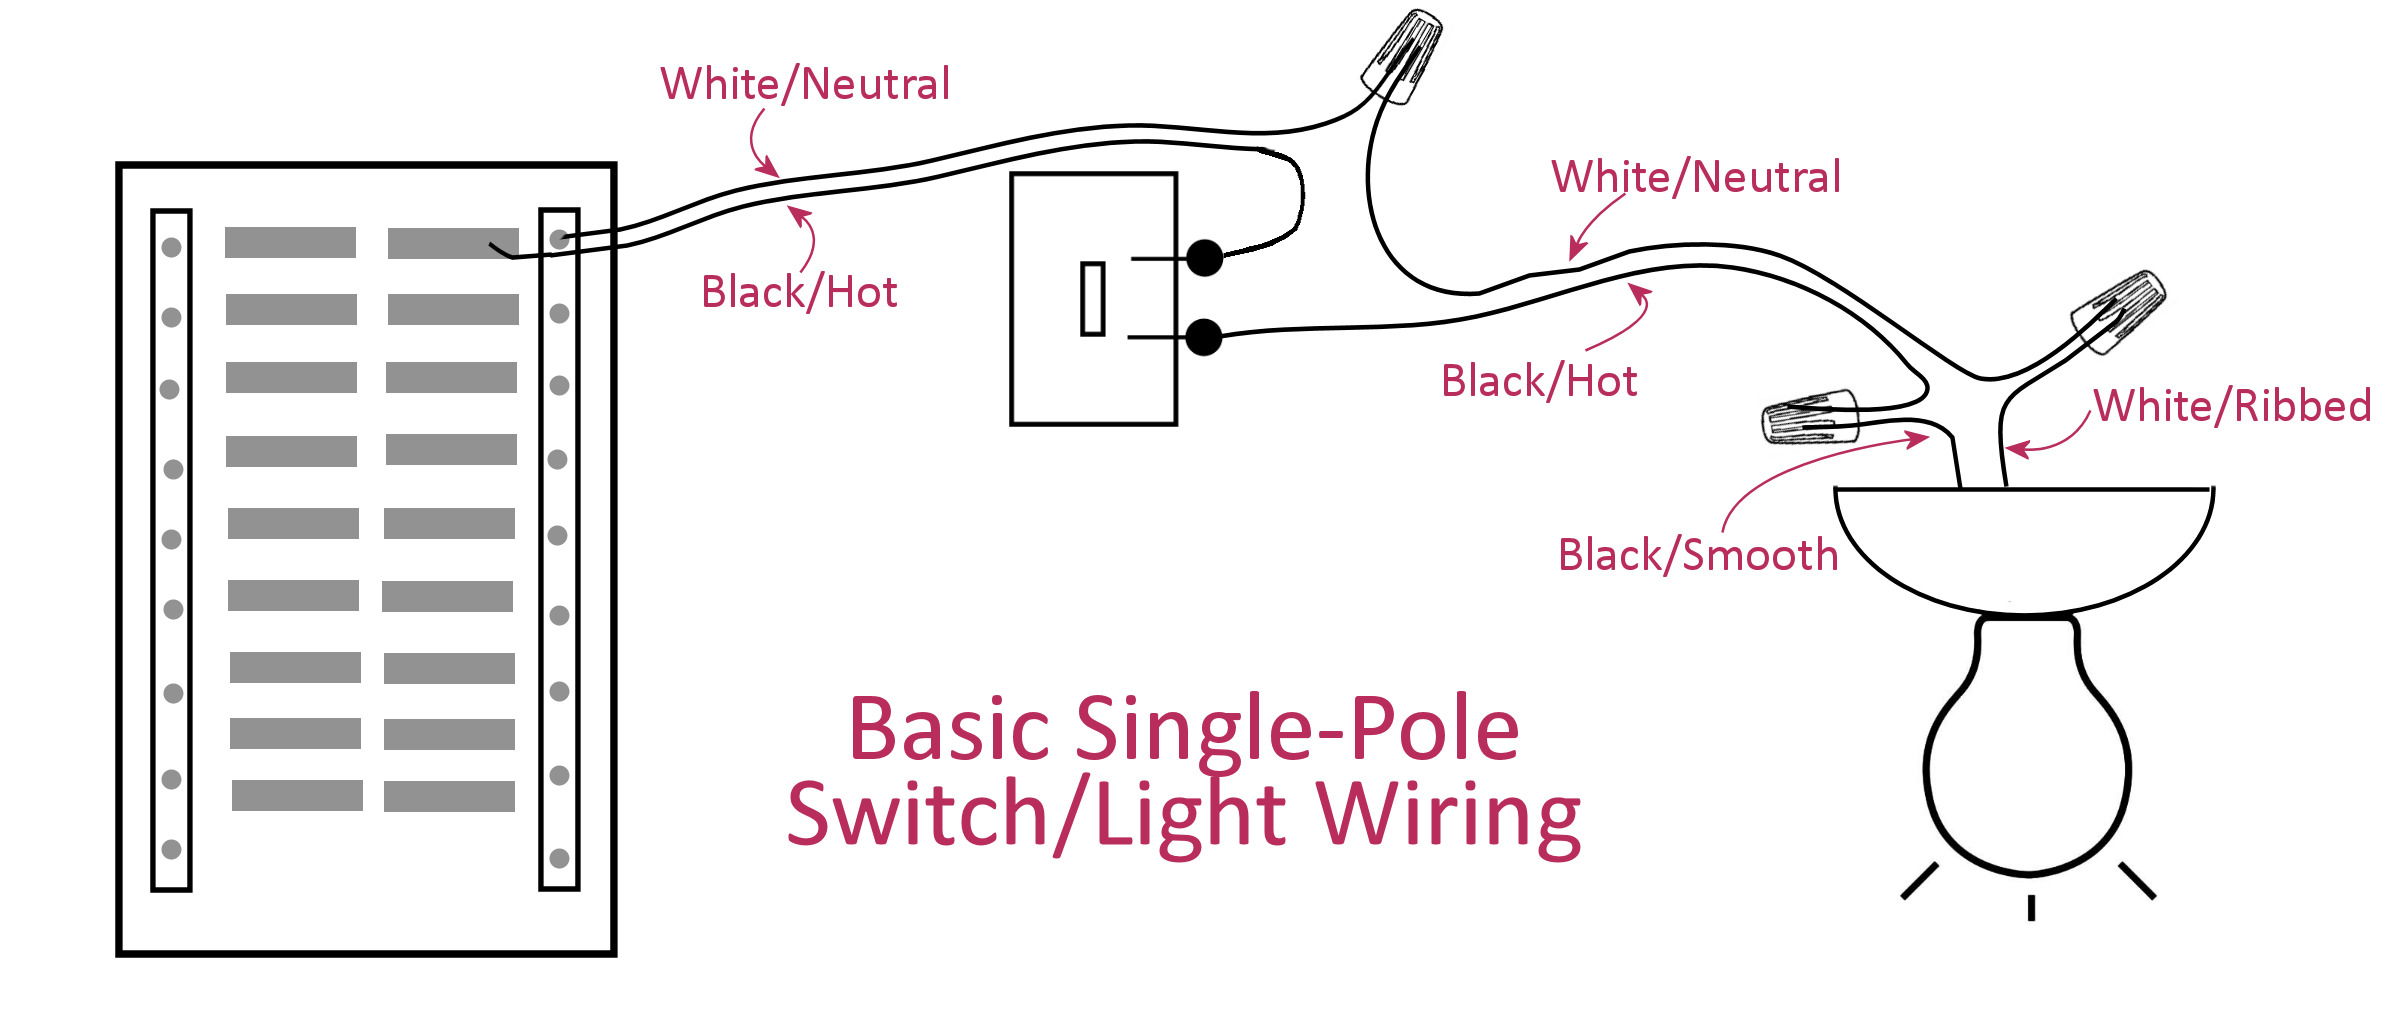 3 Switches One Light Wiring Diagram - Collection - Wiring Collection